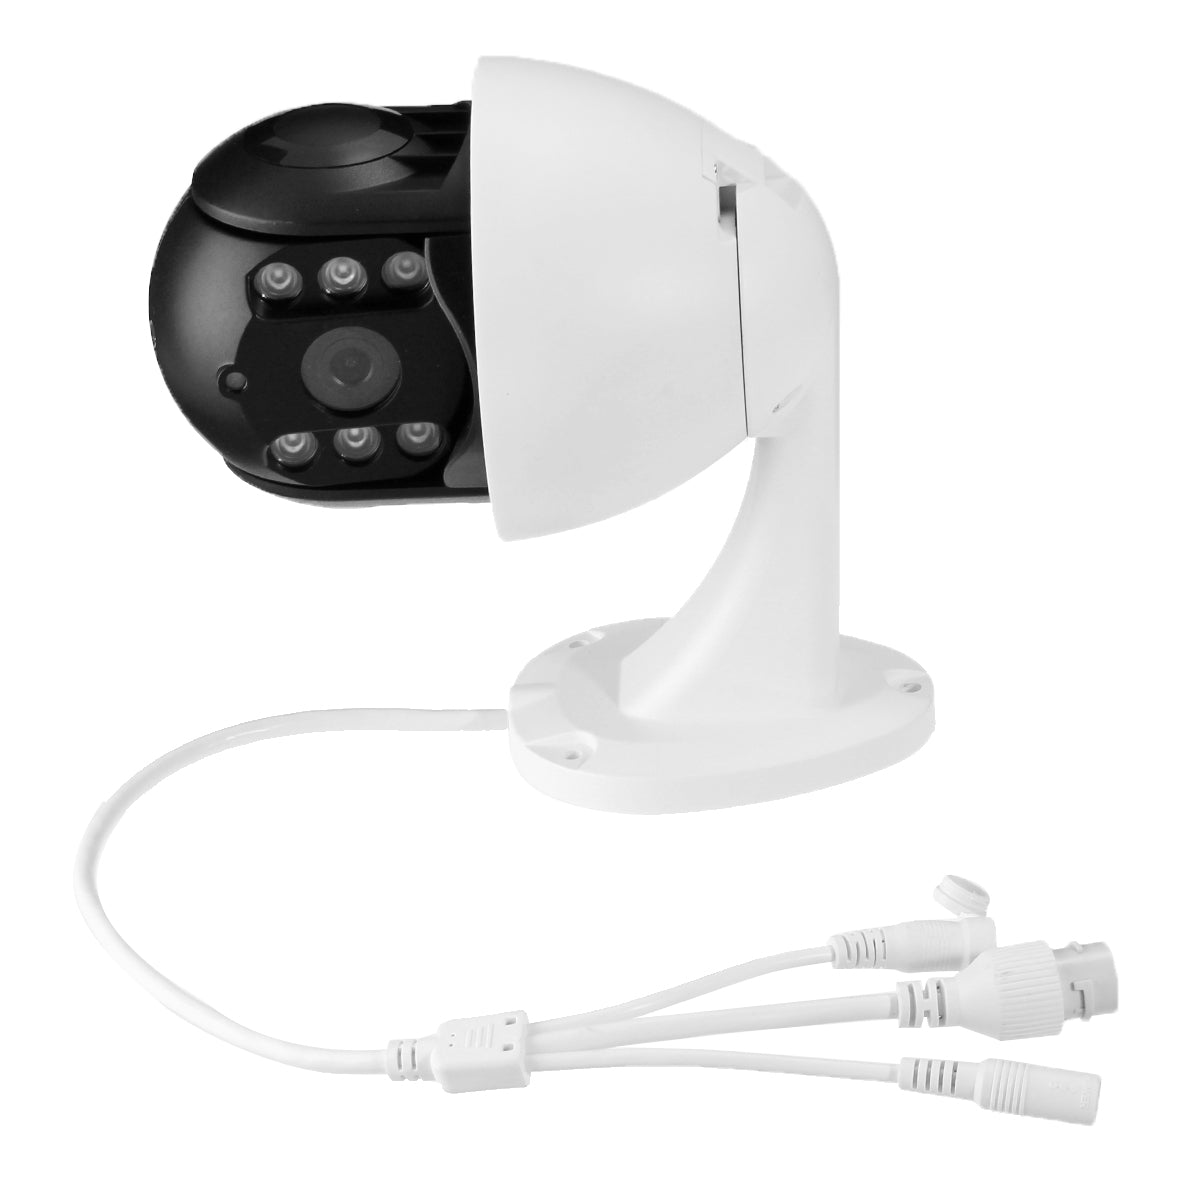 1080P 2.0MP WiFi Wireless PTZ Security IP Camera Outdoor Waterproof Monitor Night Vision